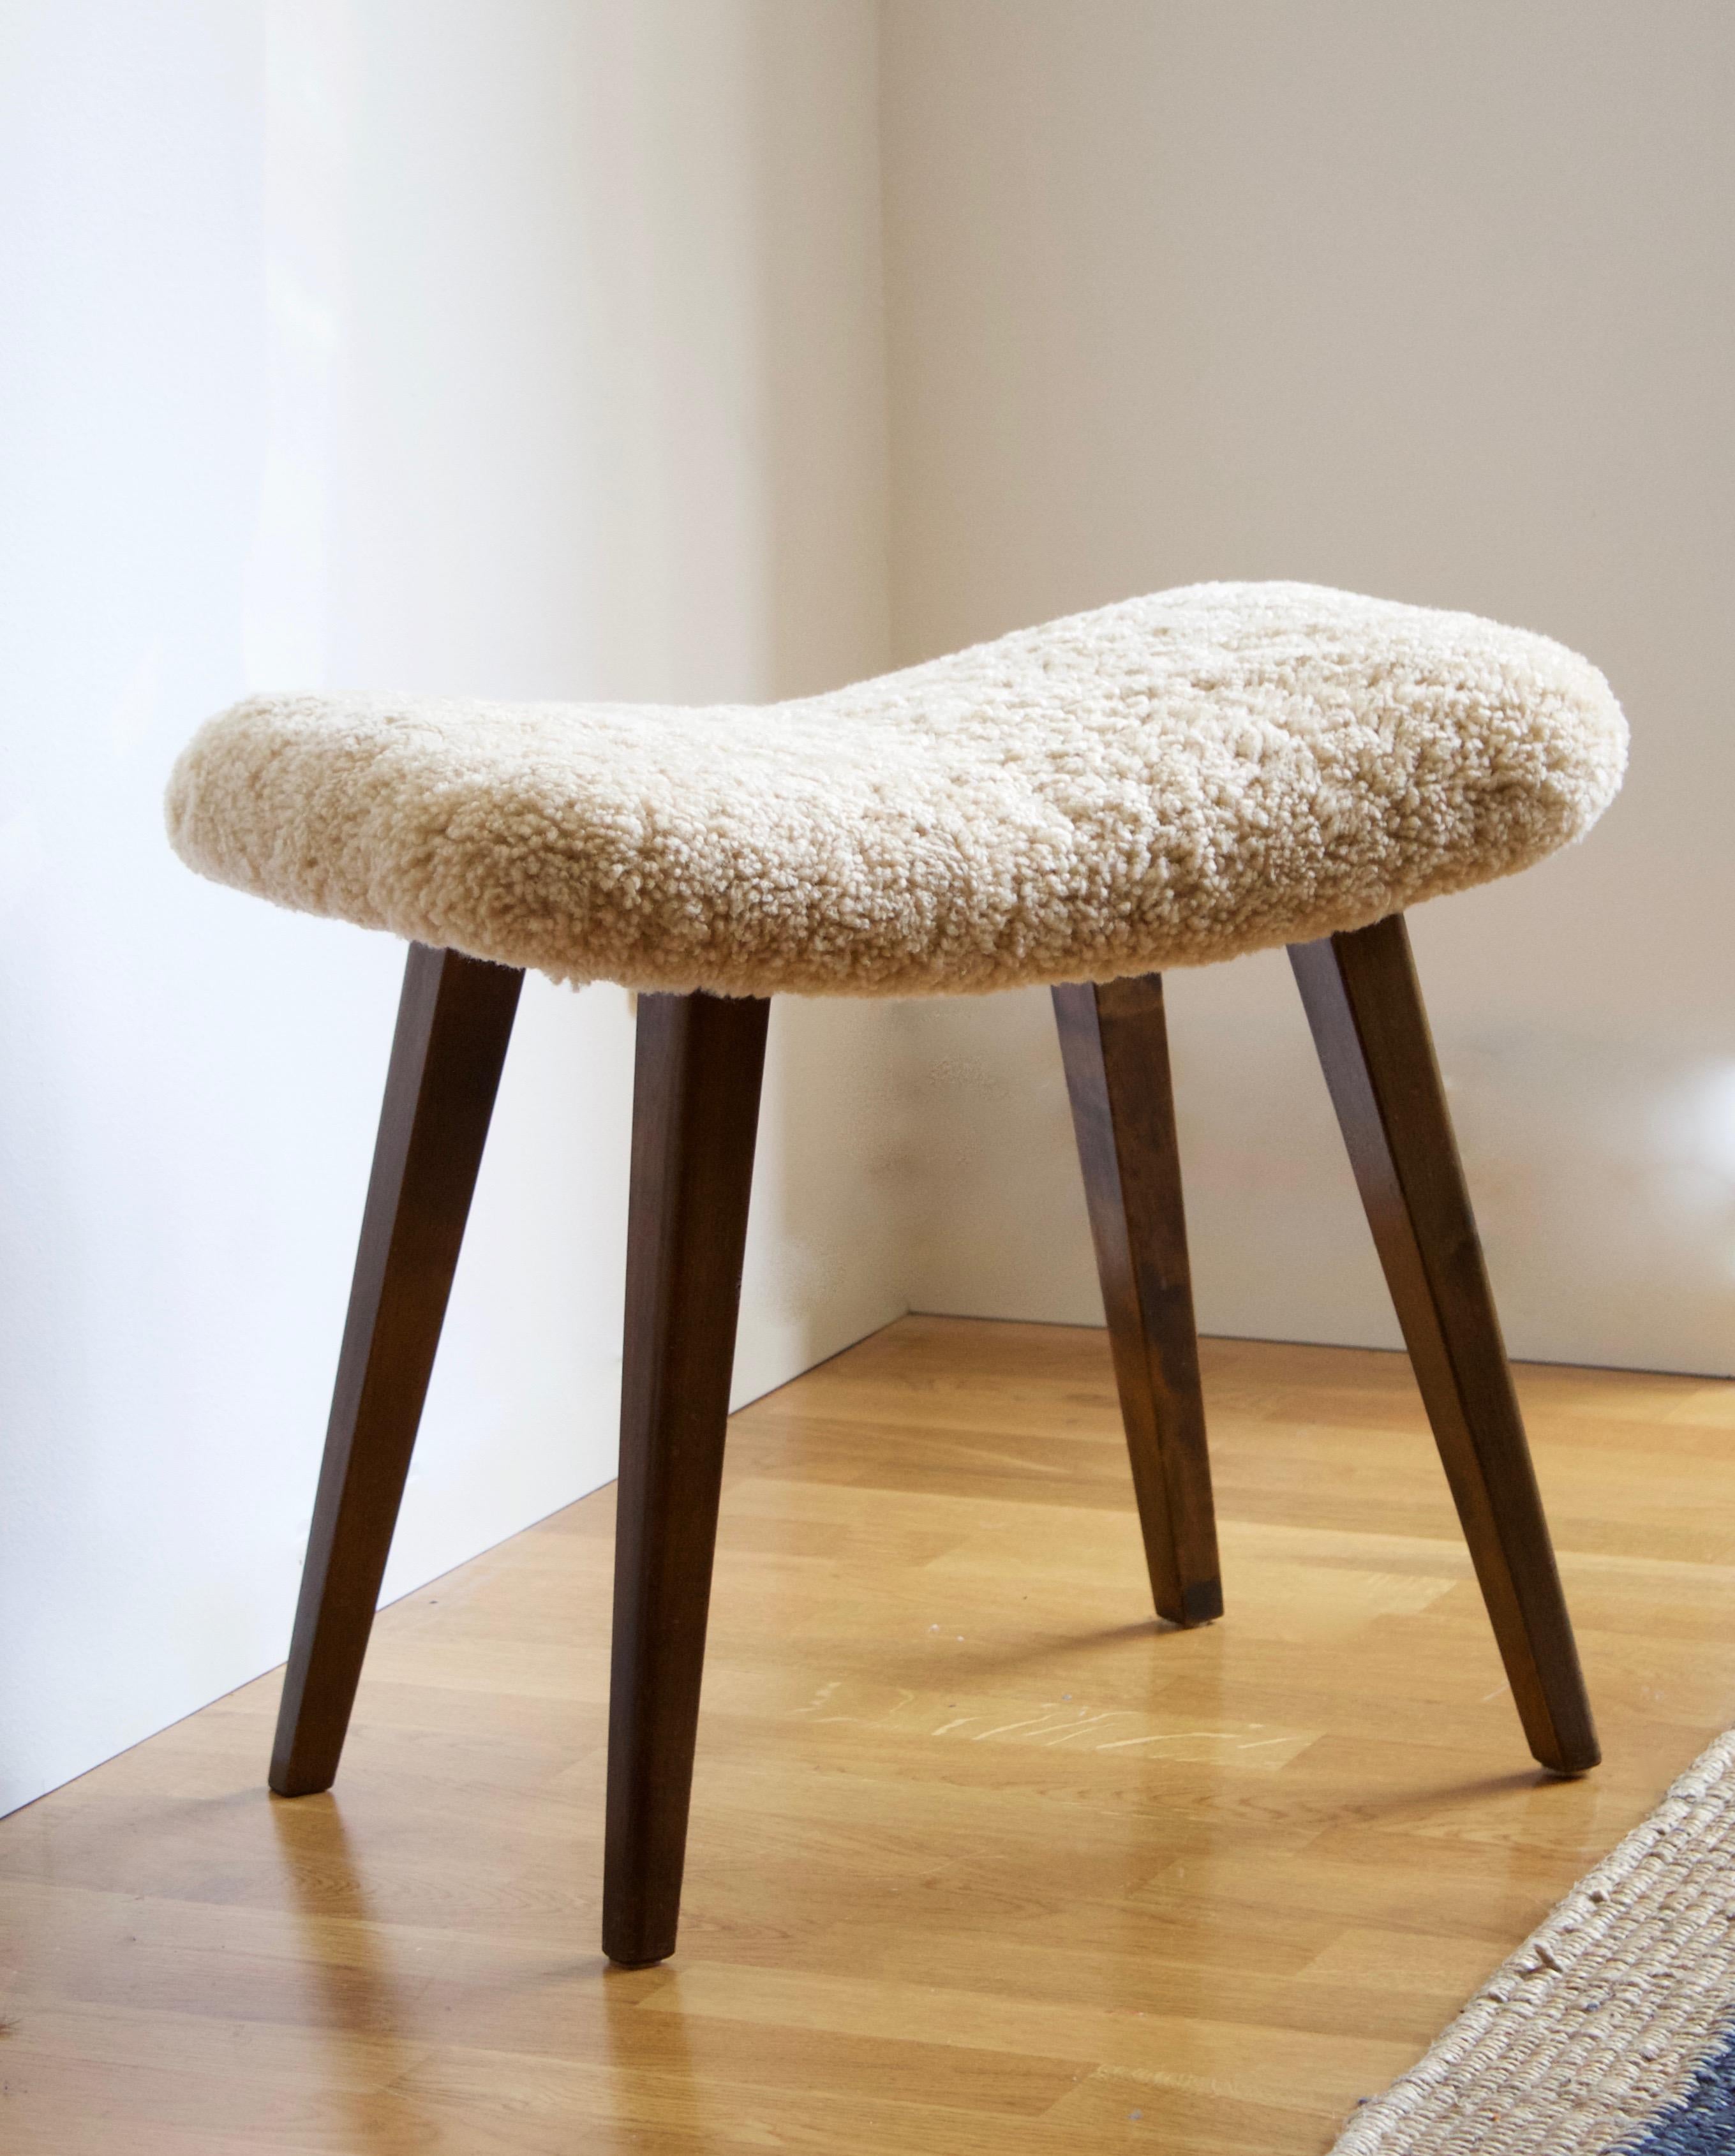 A stool in dark stained wood, overstuffed seat reupholstered in brand new authentic sheepskin upholstery. Produced in Sweden, 1950s.

Other designers of the period include Finn Juhl, Hans Wegner, Isamu Noguchi, Charlotte Perriand.